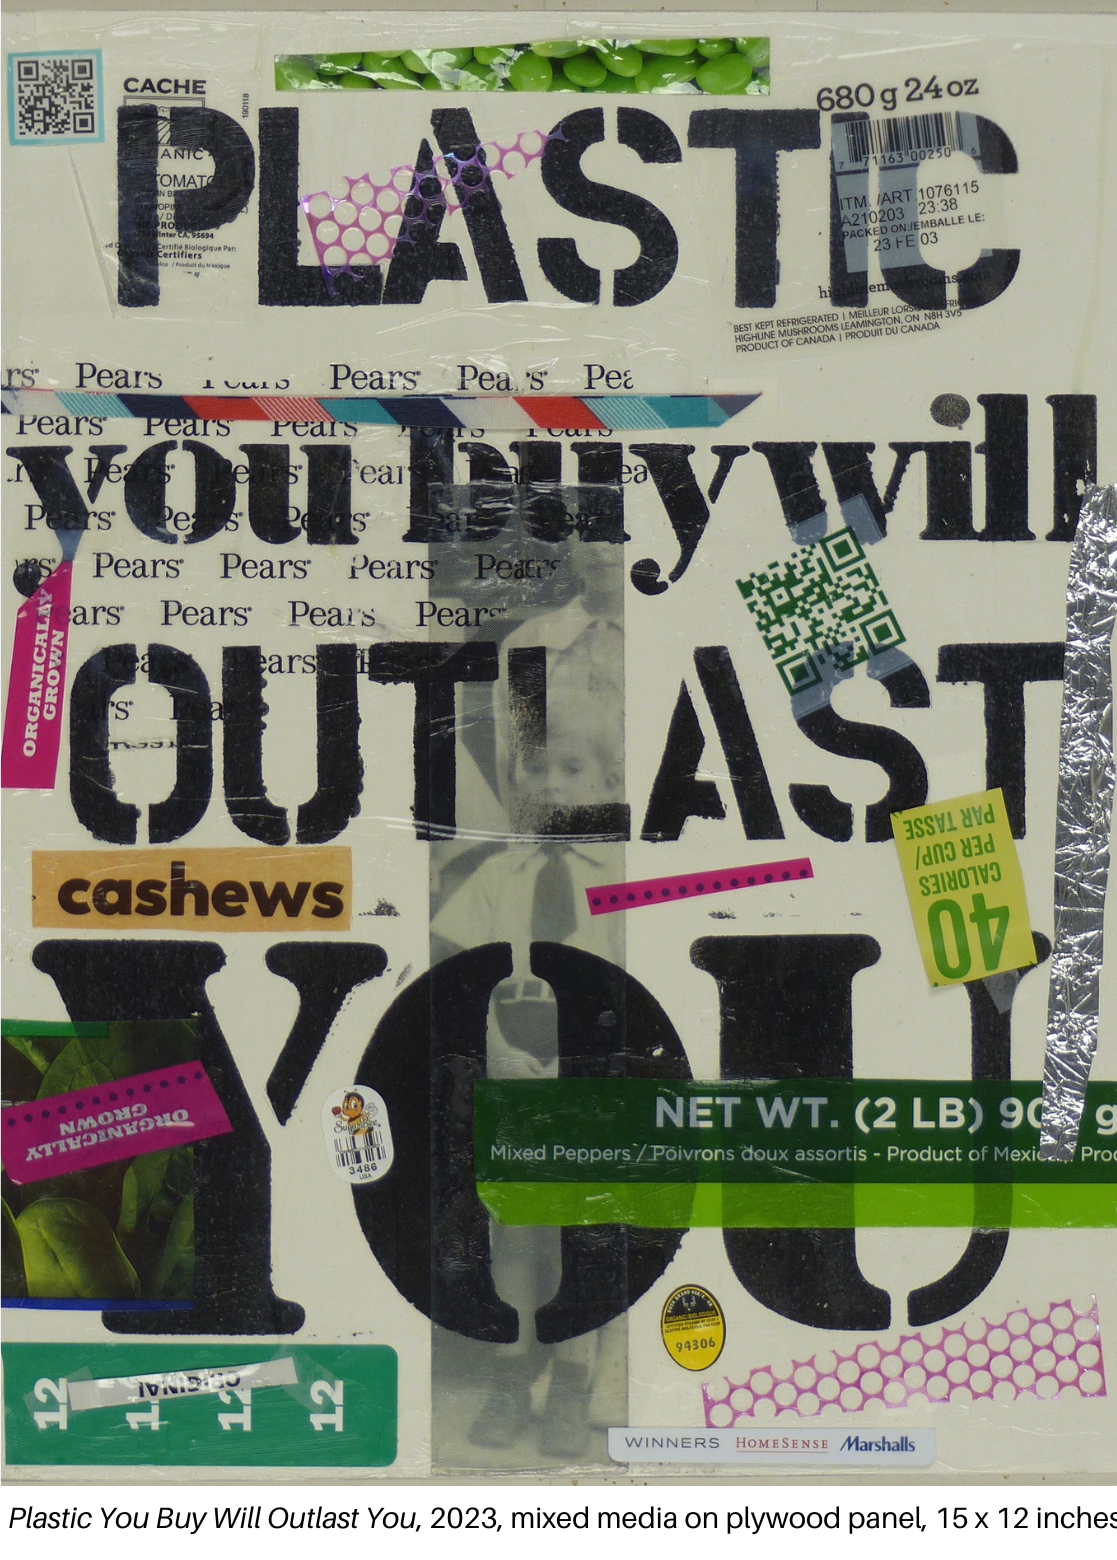 Plastic You Buy Will Outlast You